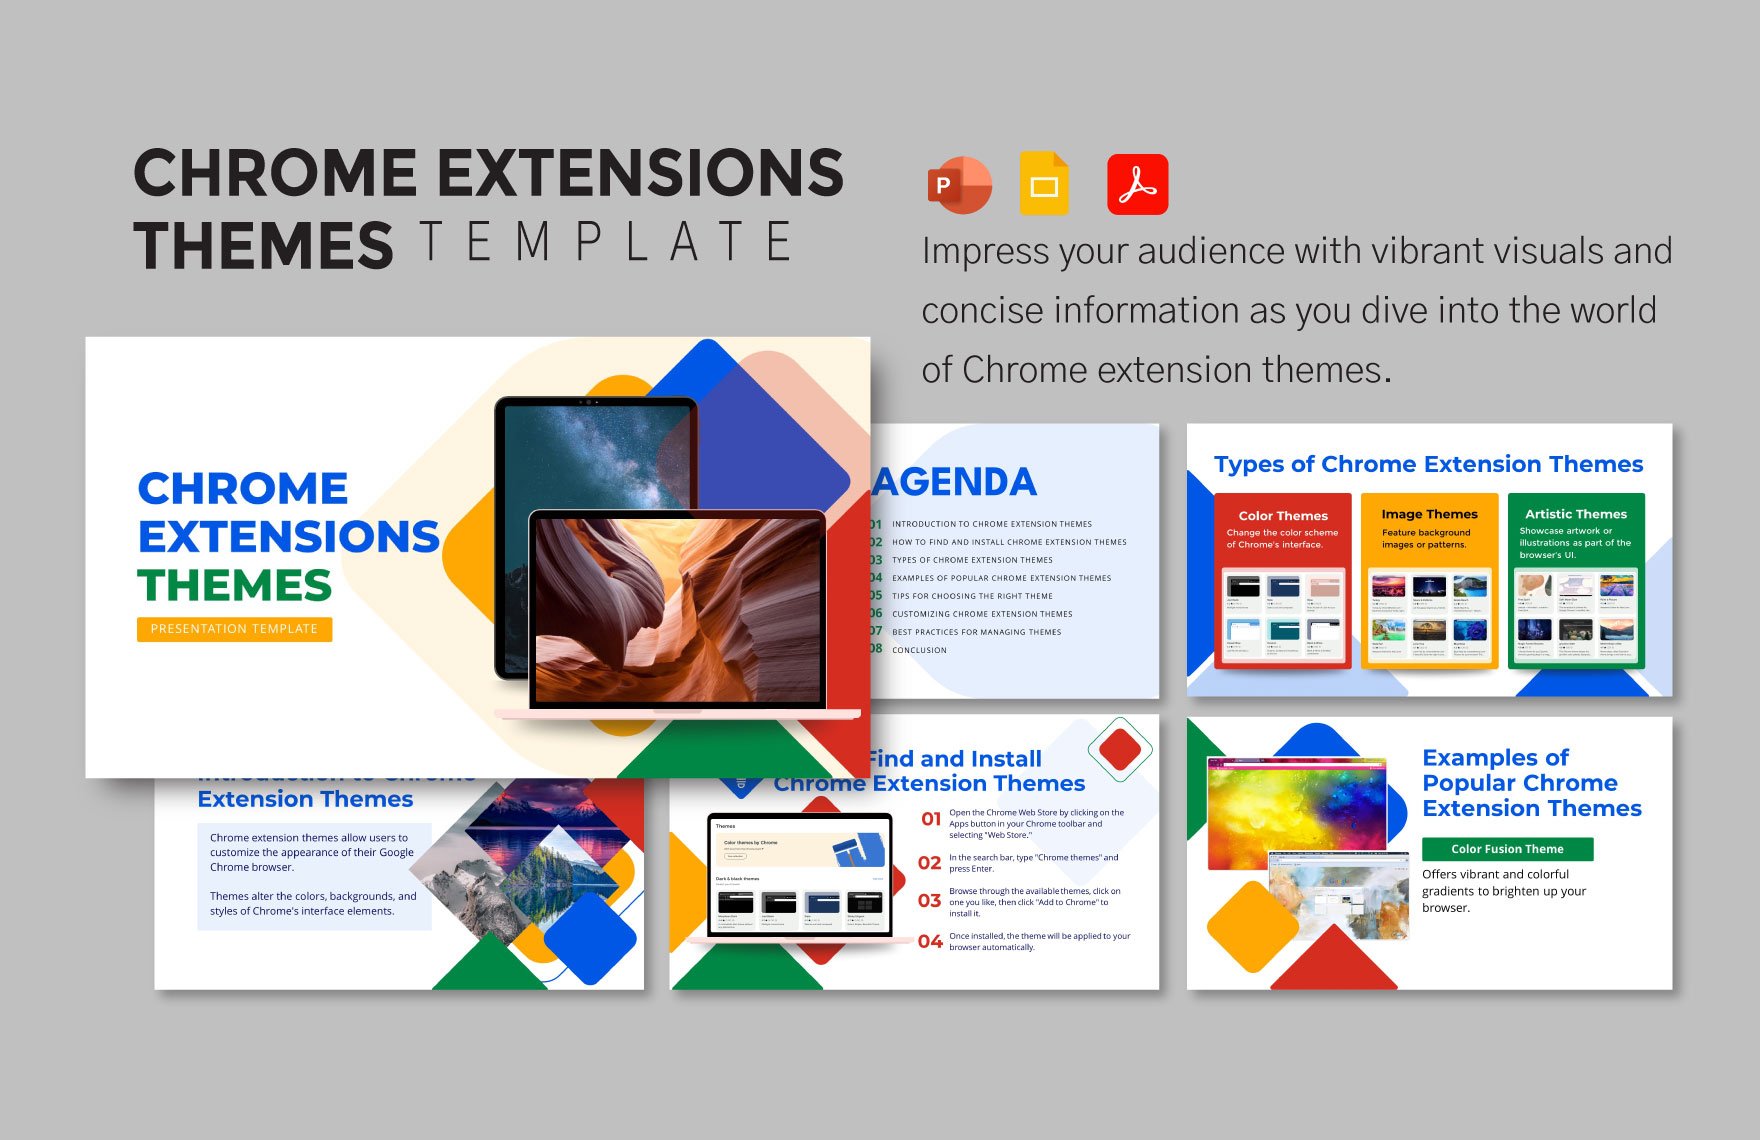 Chrome Extensions Themes Template